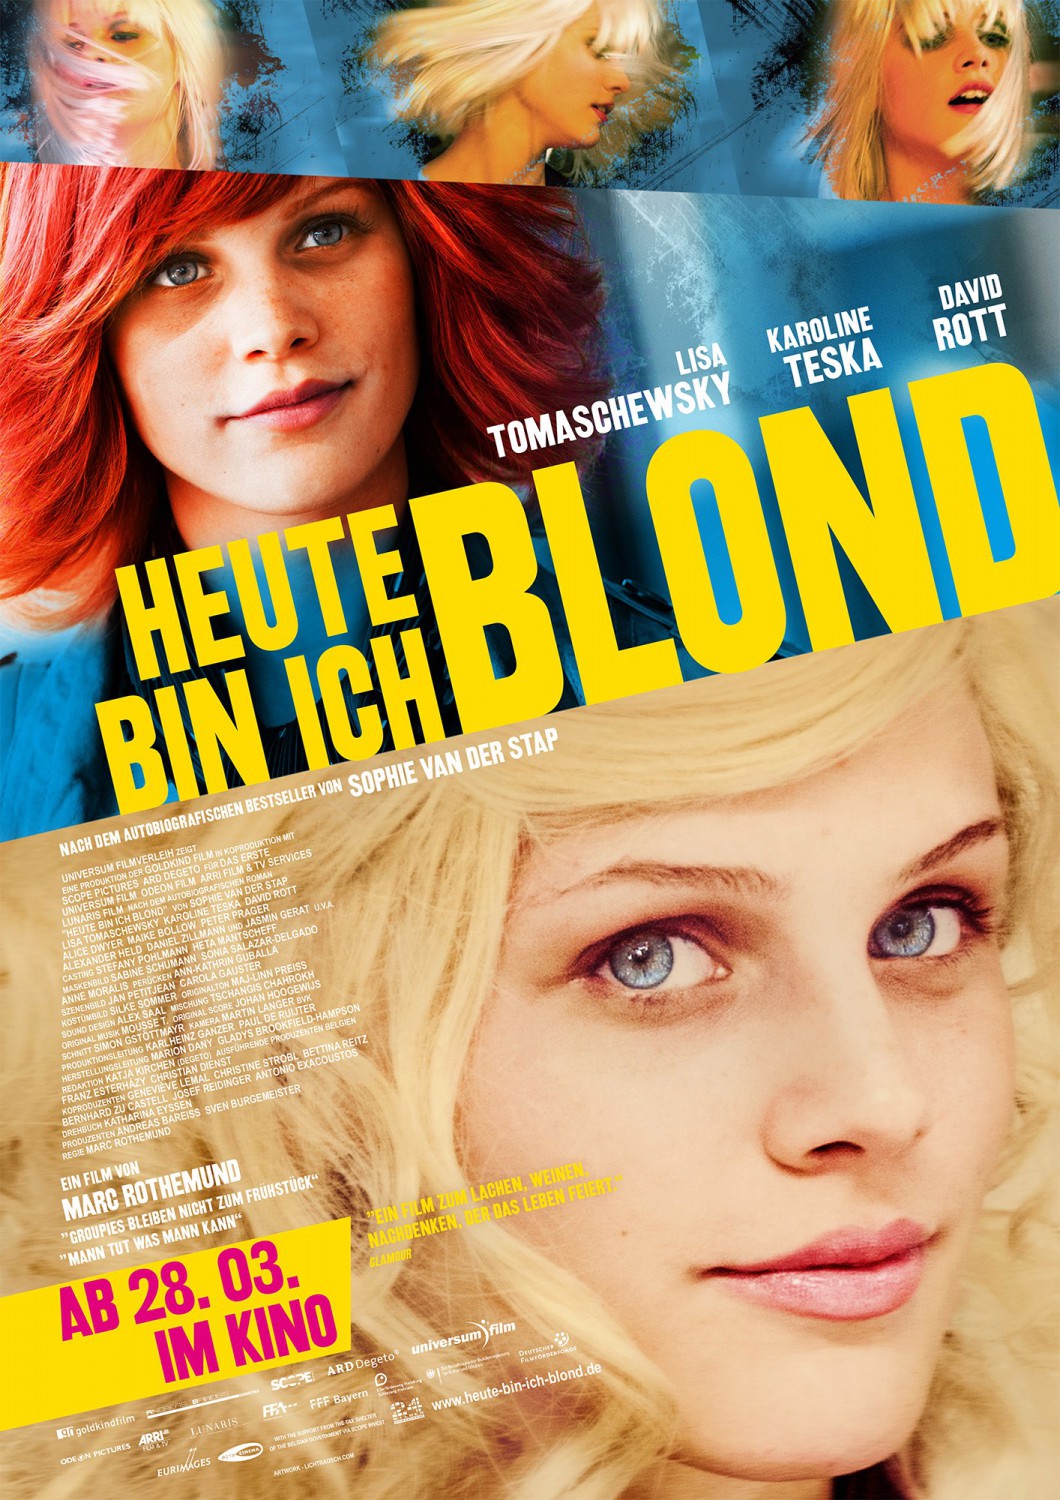 Extra Large Movie Poster Image for Heute bin ich blond 